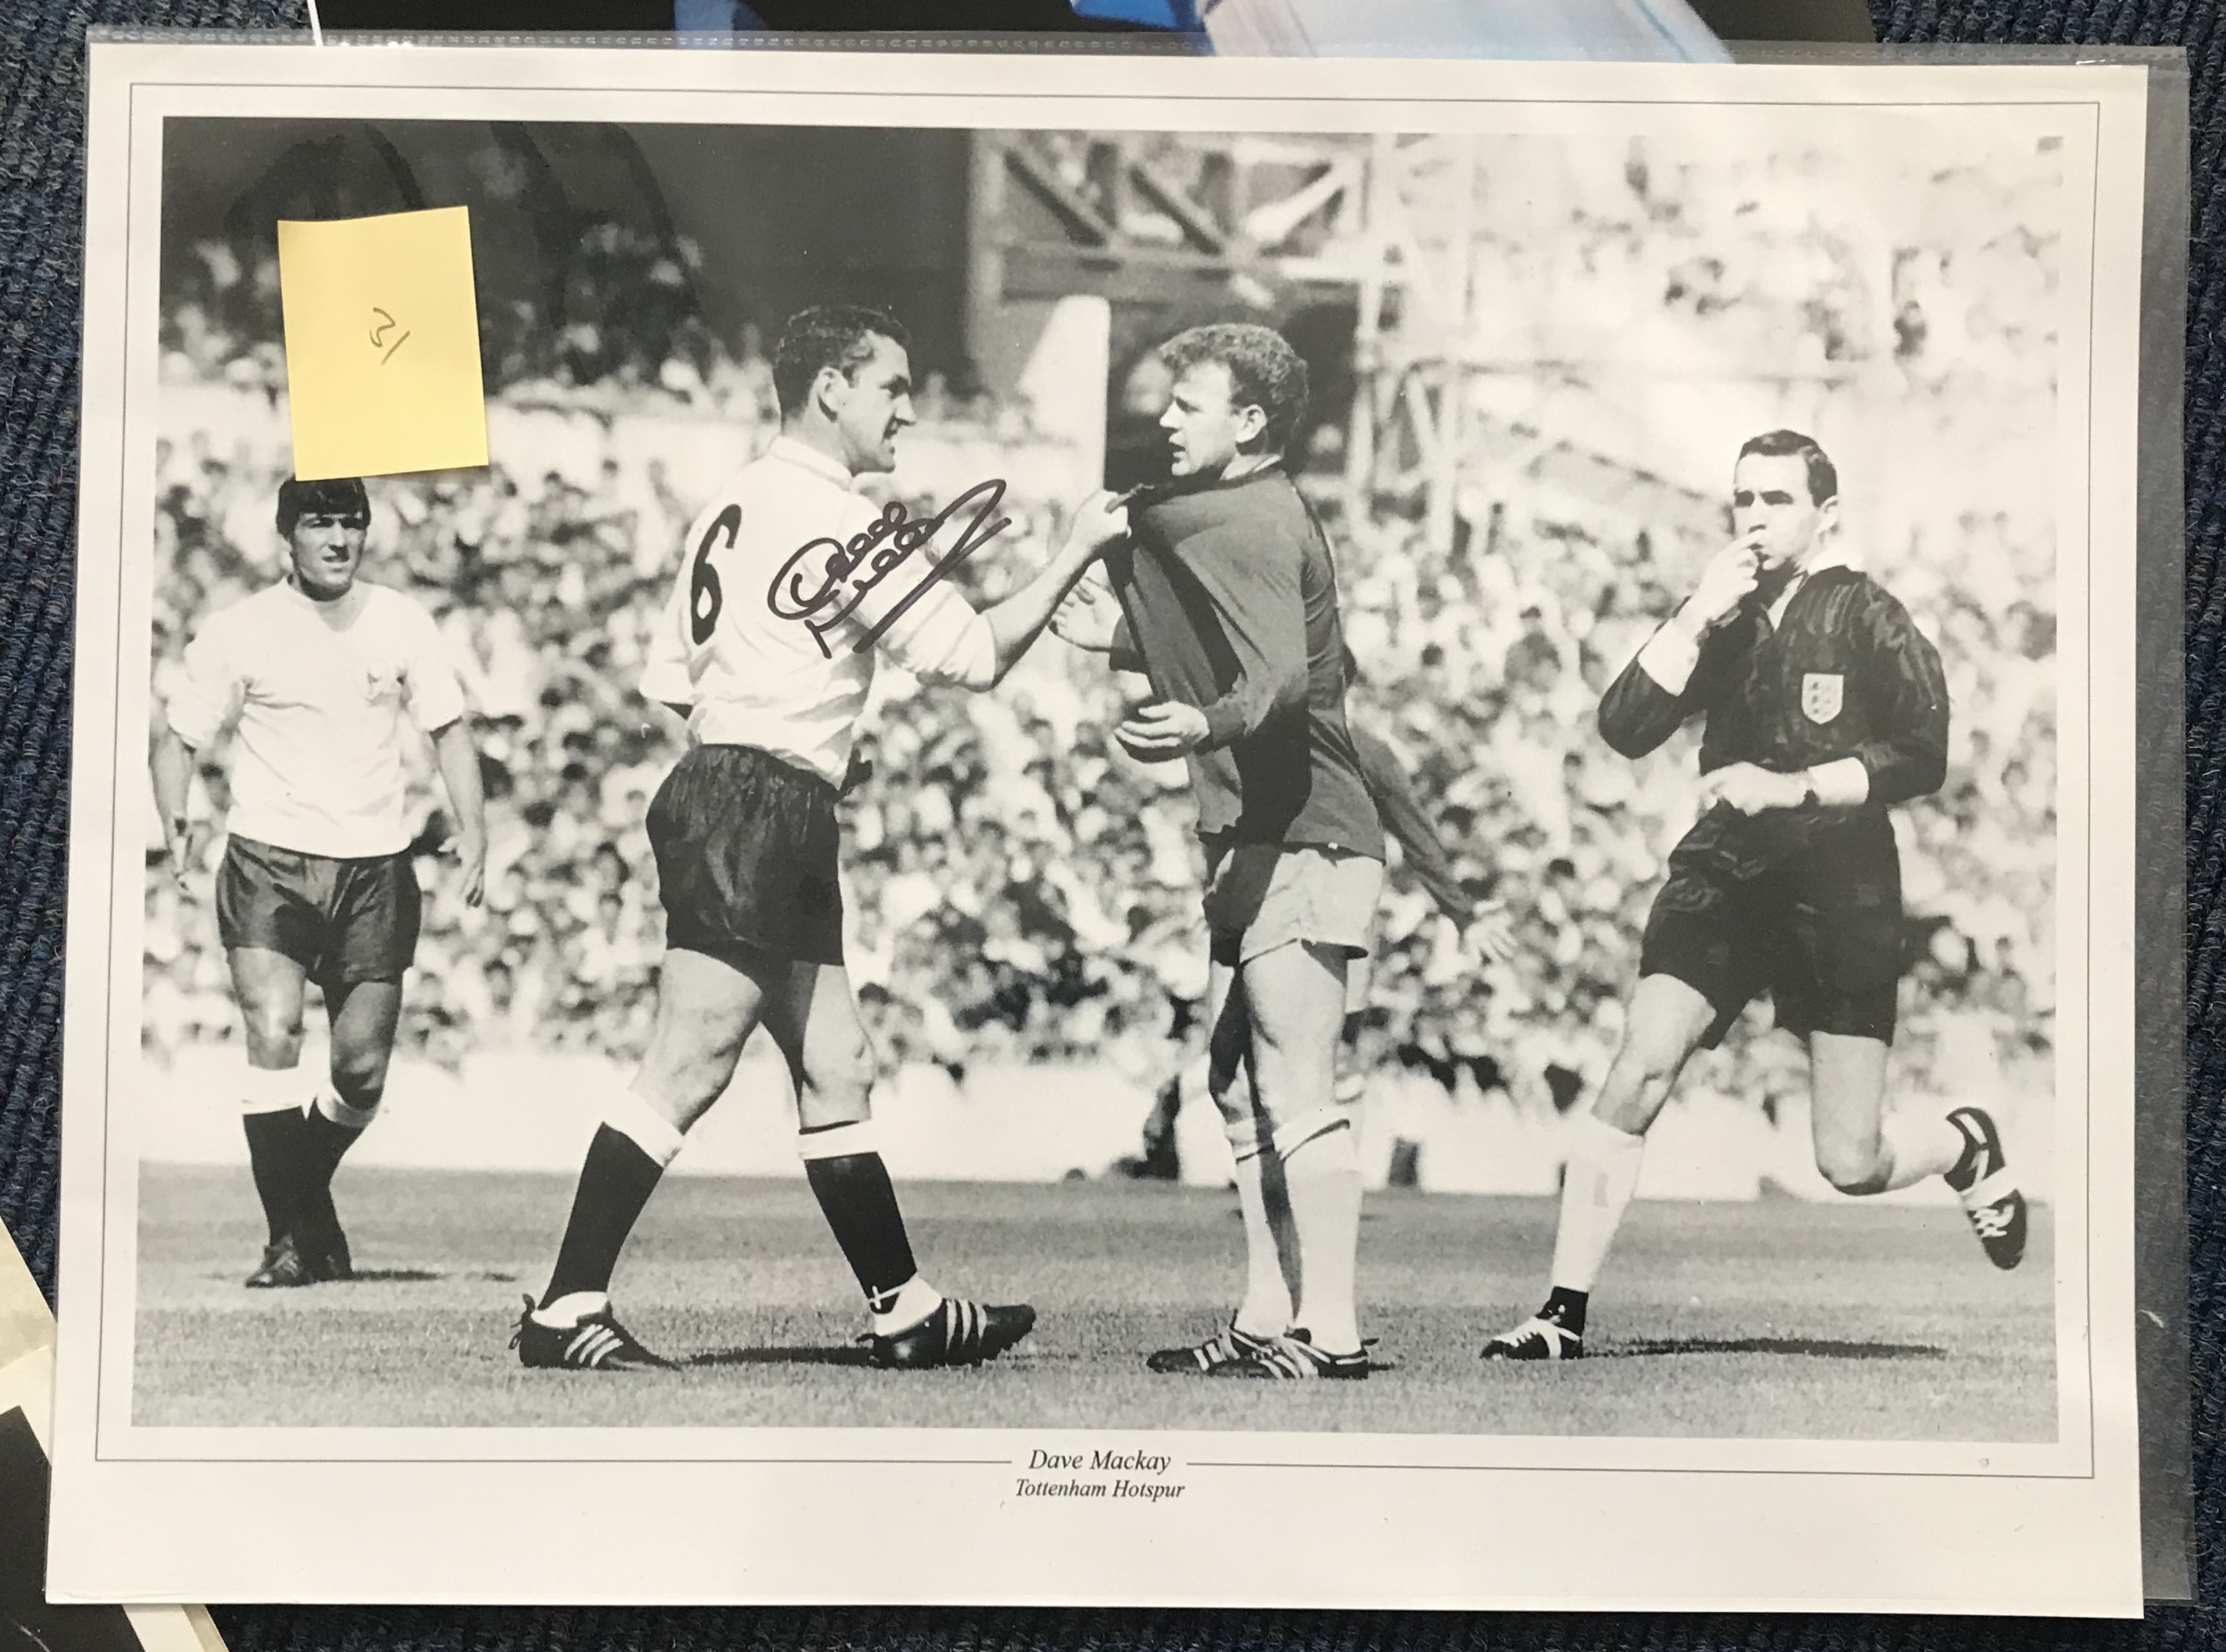 Football Hand Signed Photo of SPURS Great DAVE MACKAY. Bremner grab famous Photo. Good Condition.